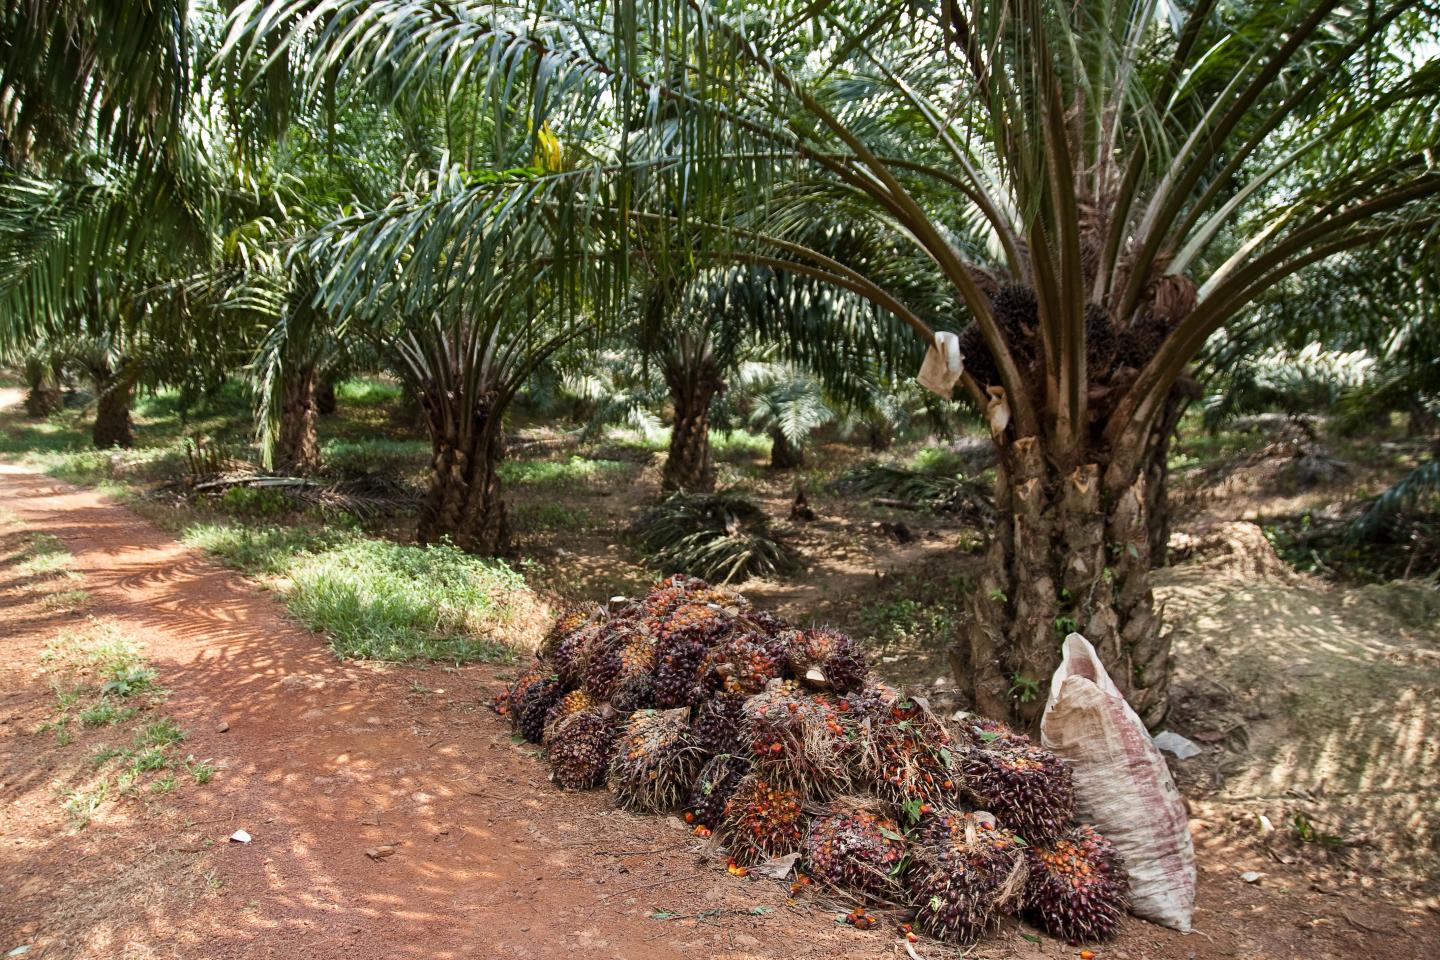 Oil Palm Harvest at Pasoh, Malaysia